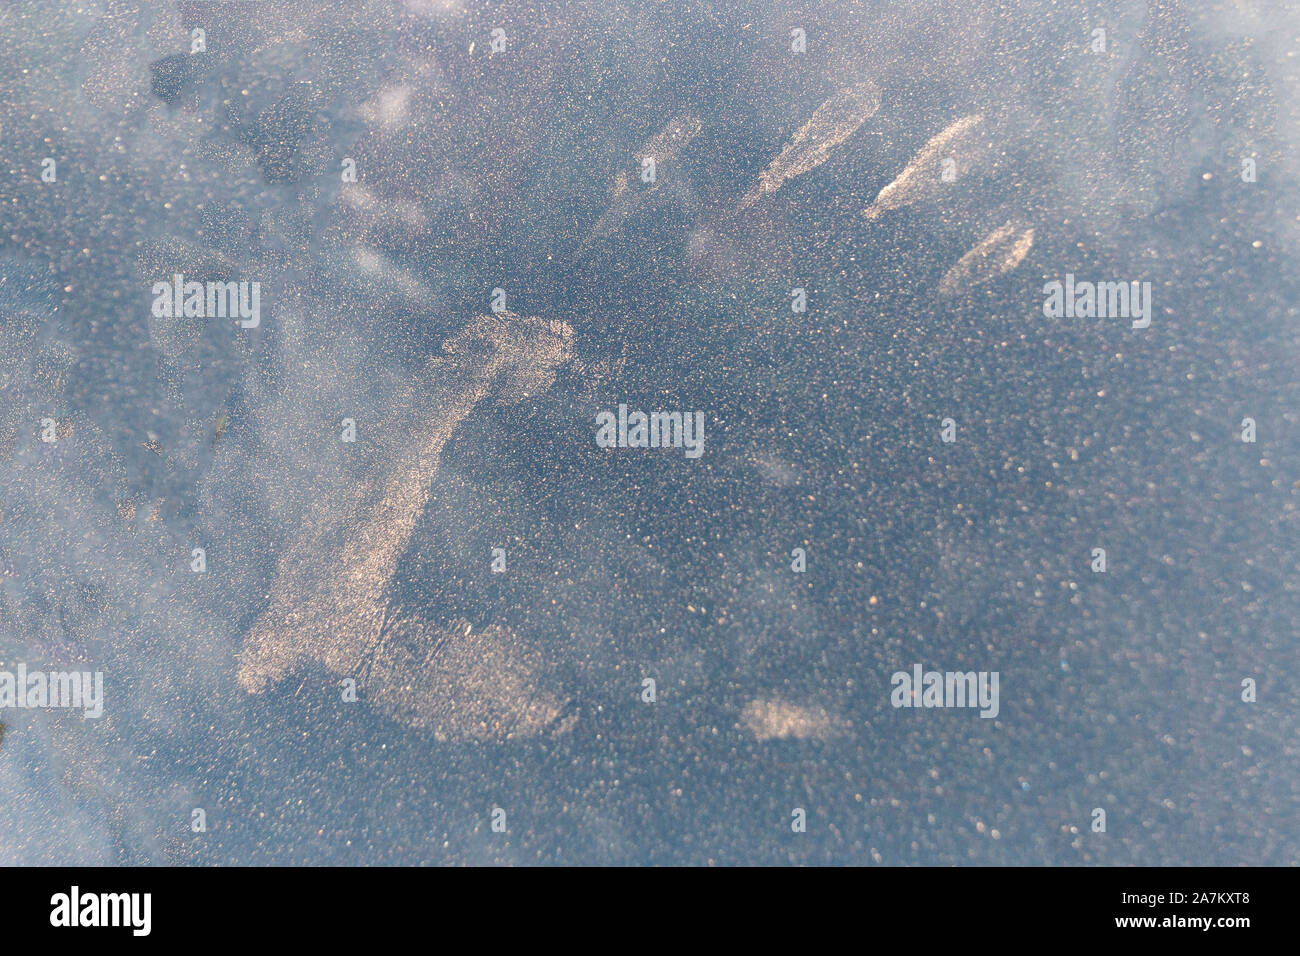 A close up view of a hand print on a very dirty and dusty window Stock Photo